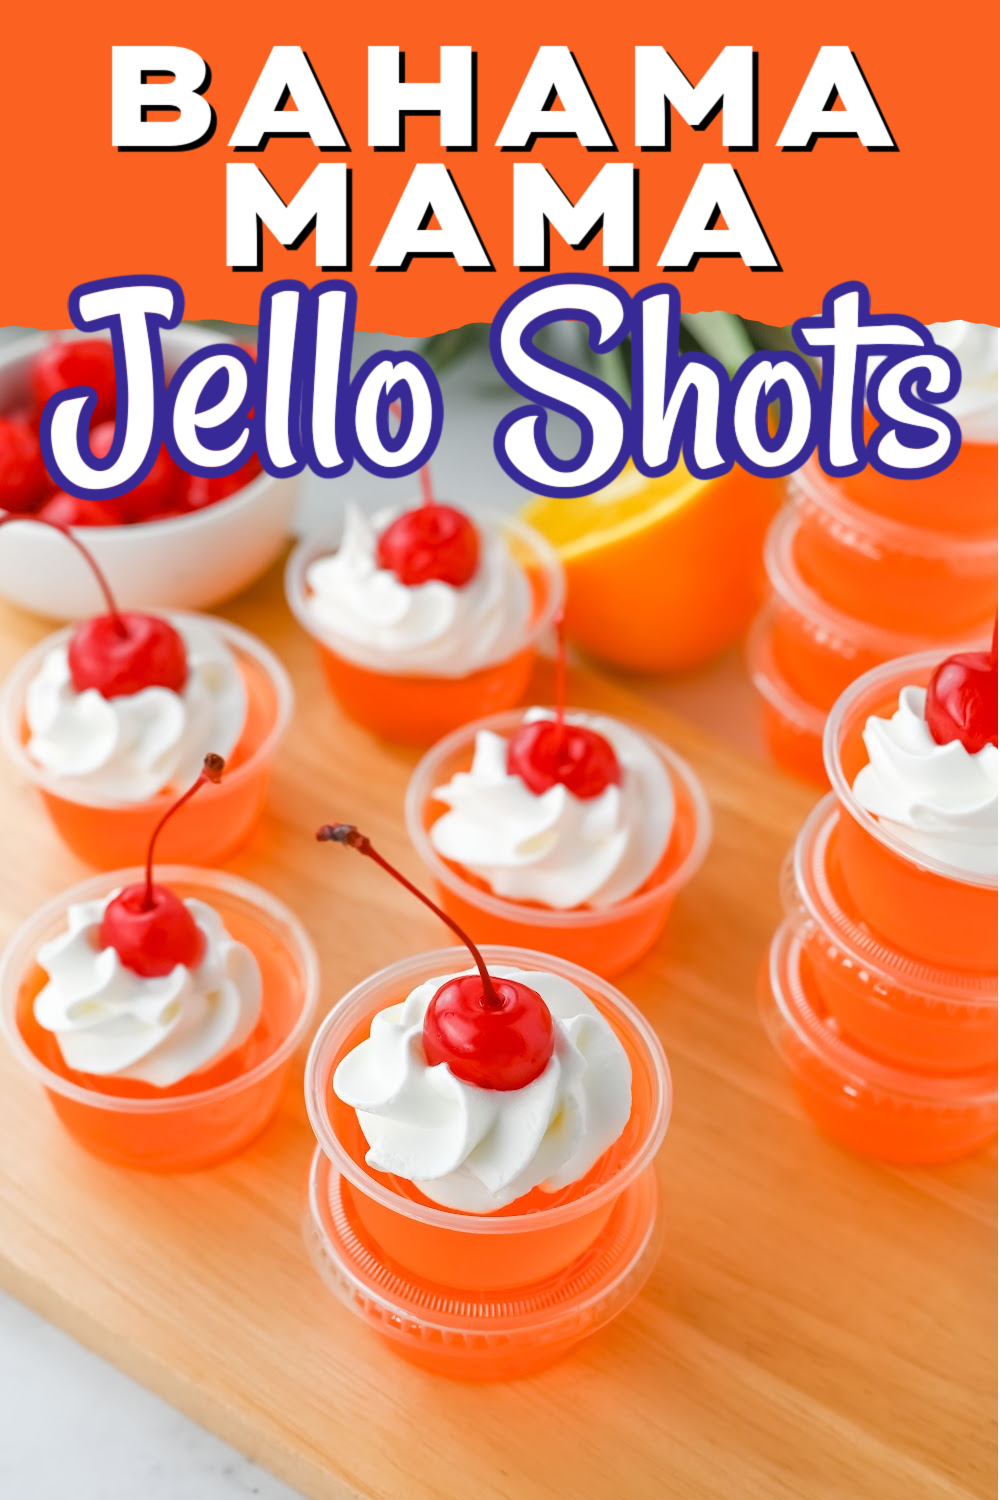 Pin image of Bahama Mama Jello shots with whipped cream and a cherry on top.